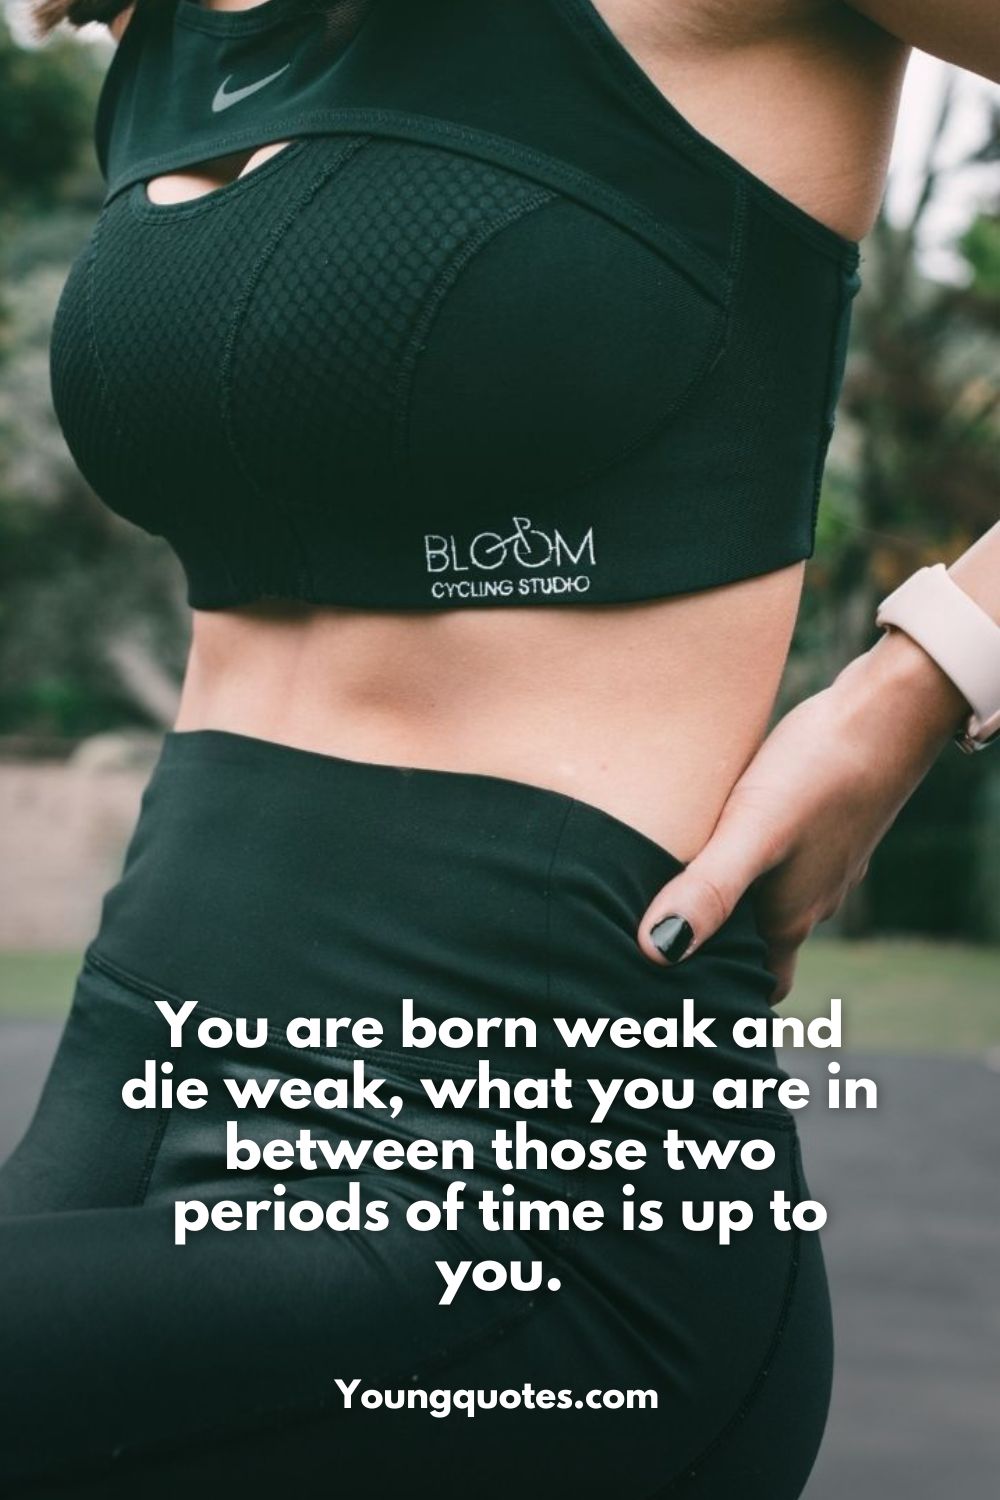 You are born weak and die weak, what you are in between those two periods of time is up to you.